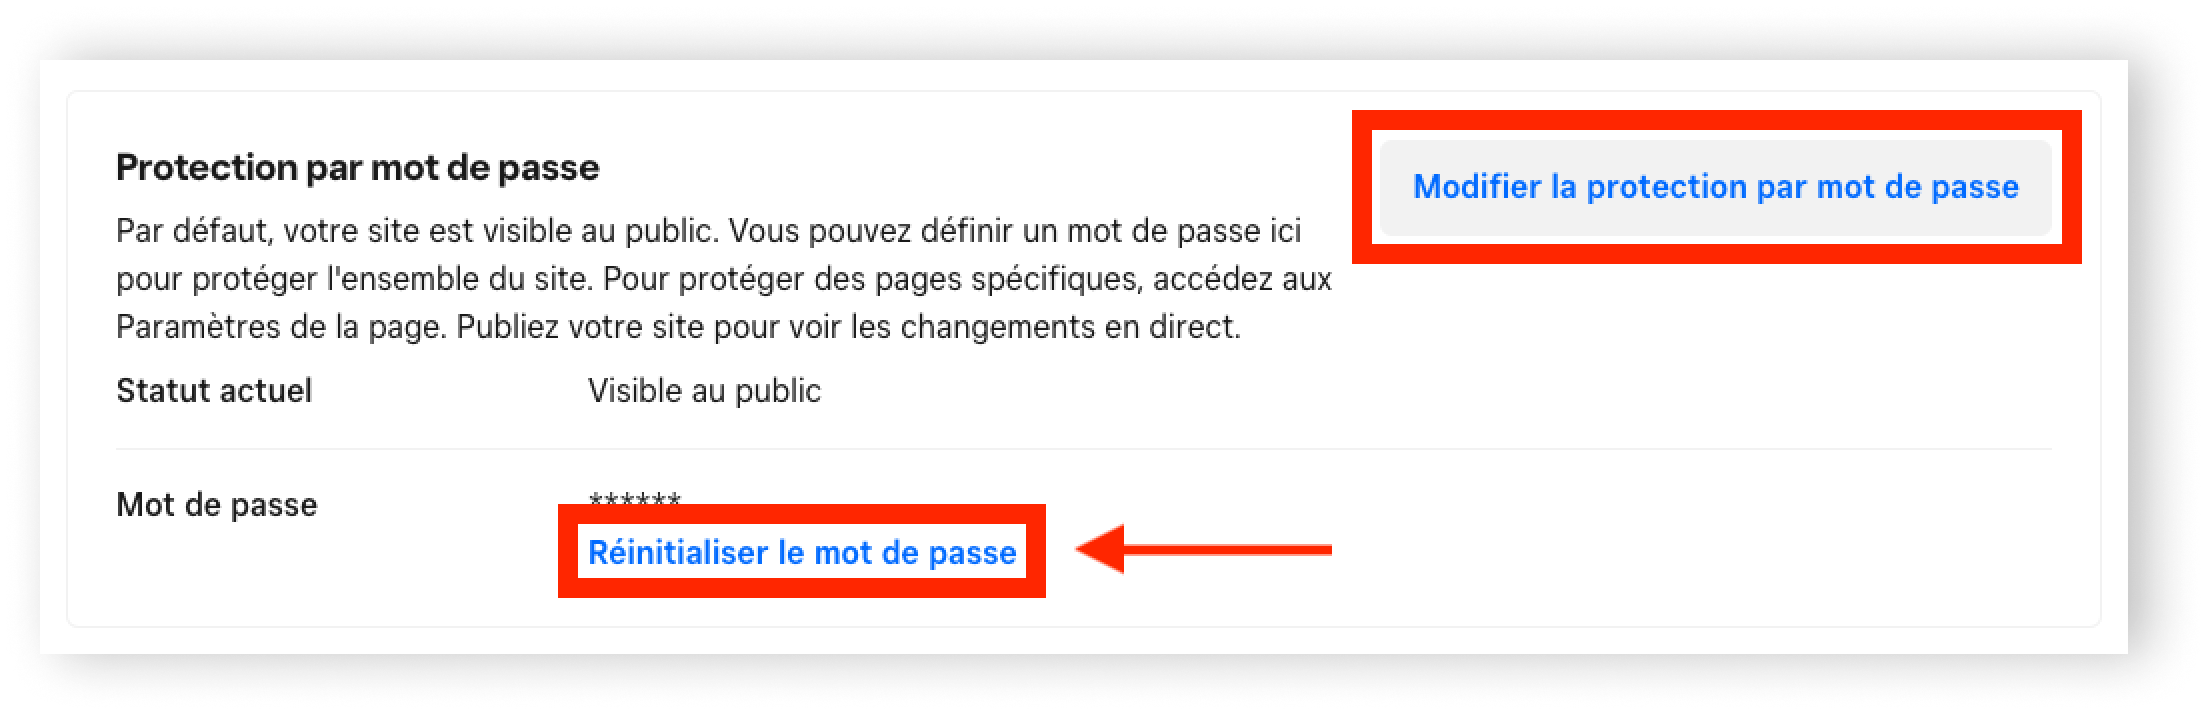 Square-Online-Password-Protection-Site-Preferences-FR